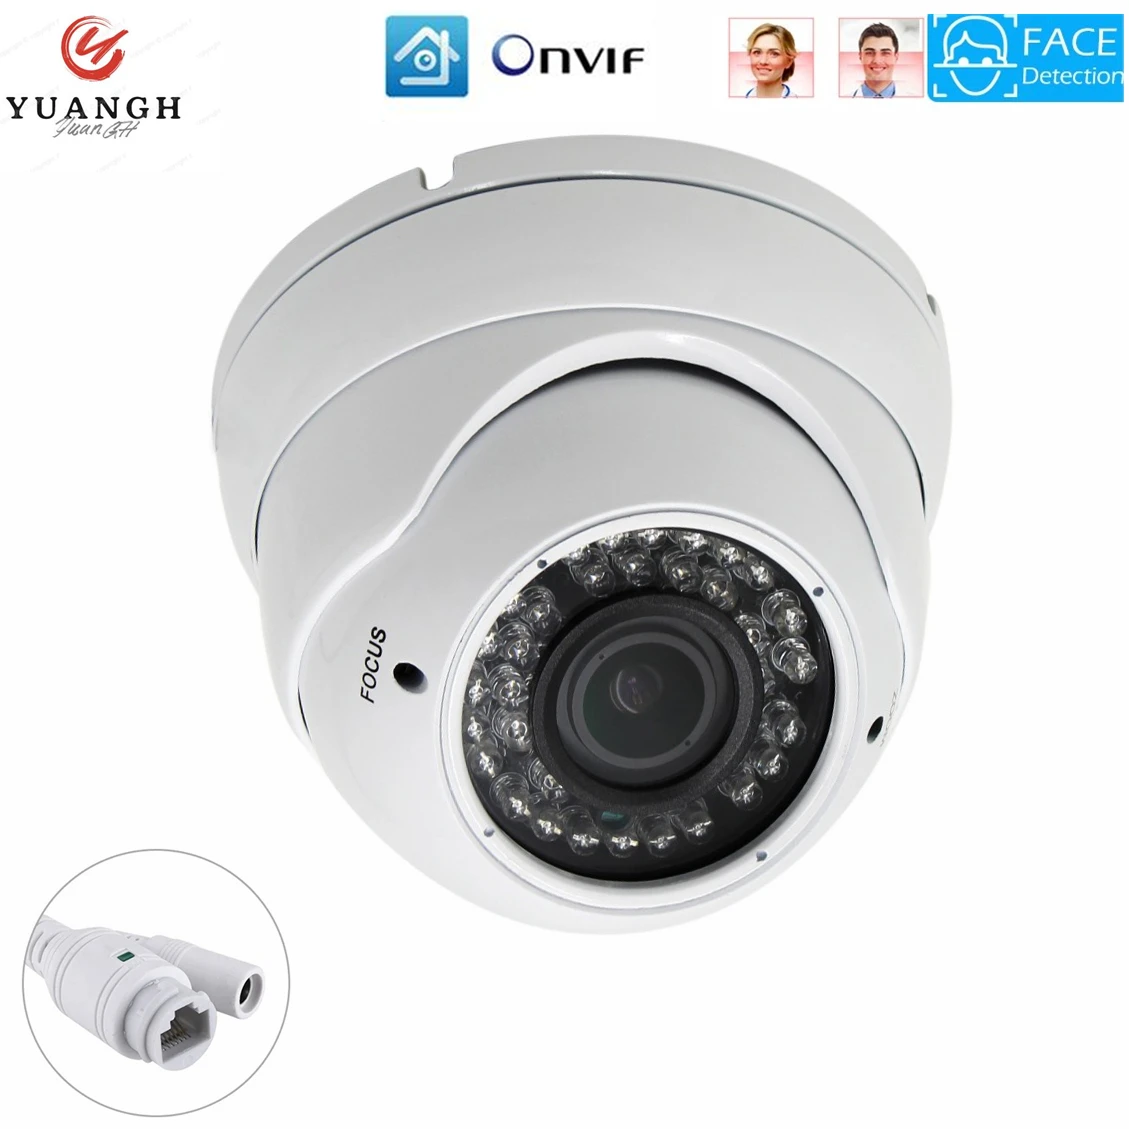 2.8-12mm Lens Manual Zoom AI Face Detection 5MP CCTV Surveillance IP Camera POE Indoor Night Vision Network Security Camera